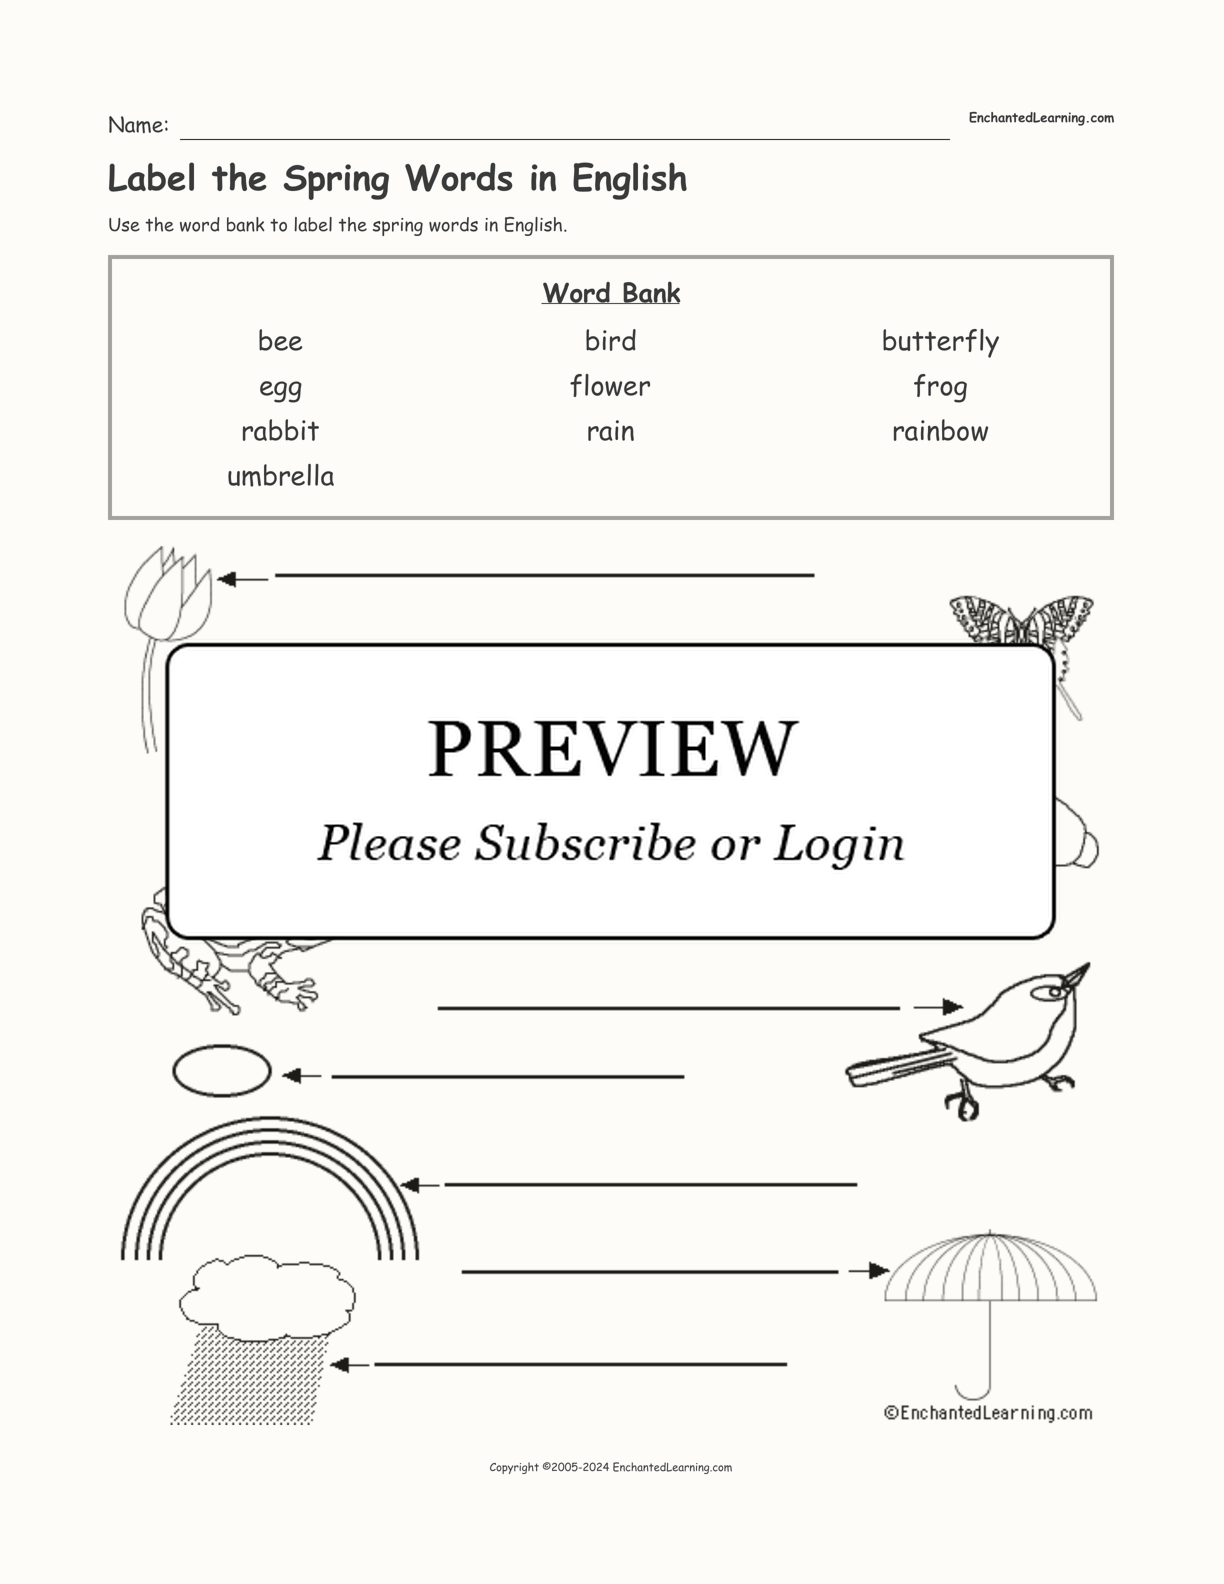 Label the Spring Words in English interactive worksheet page 1